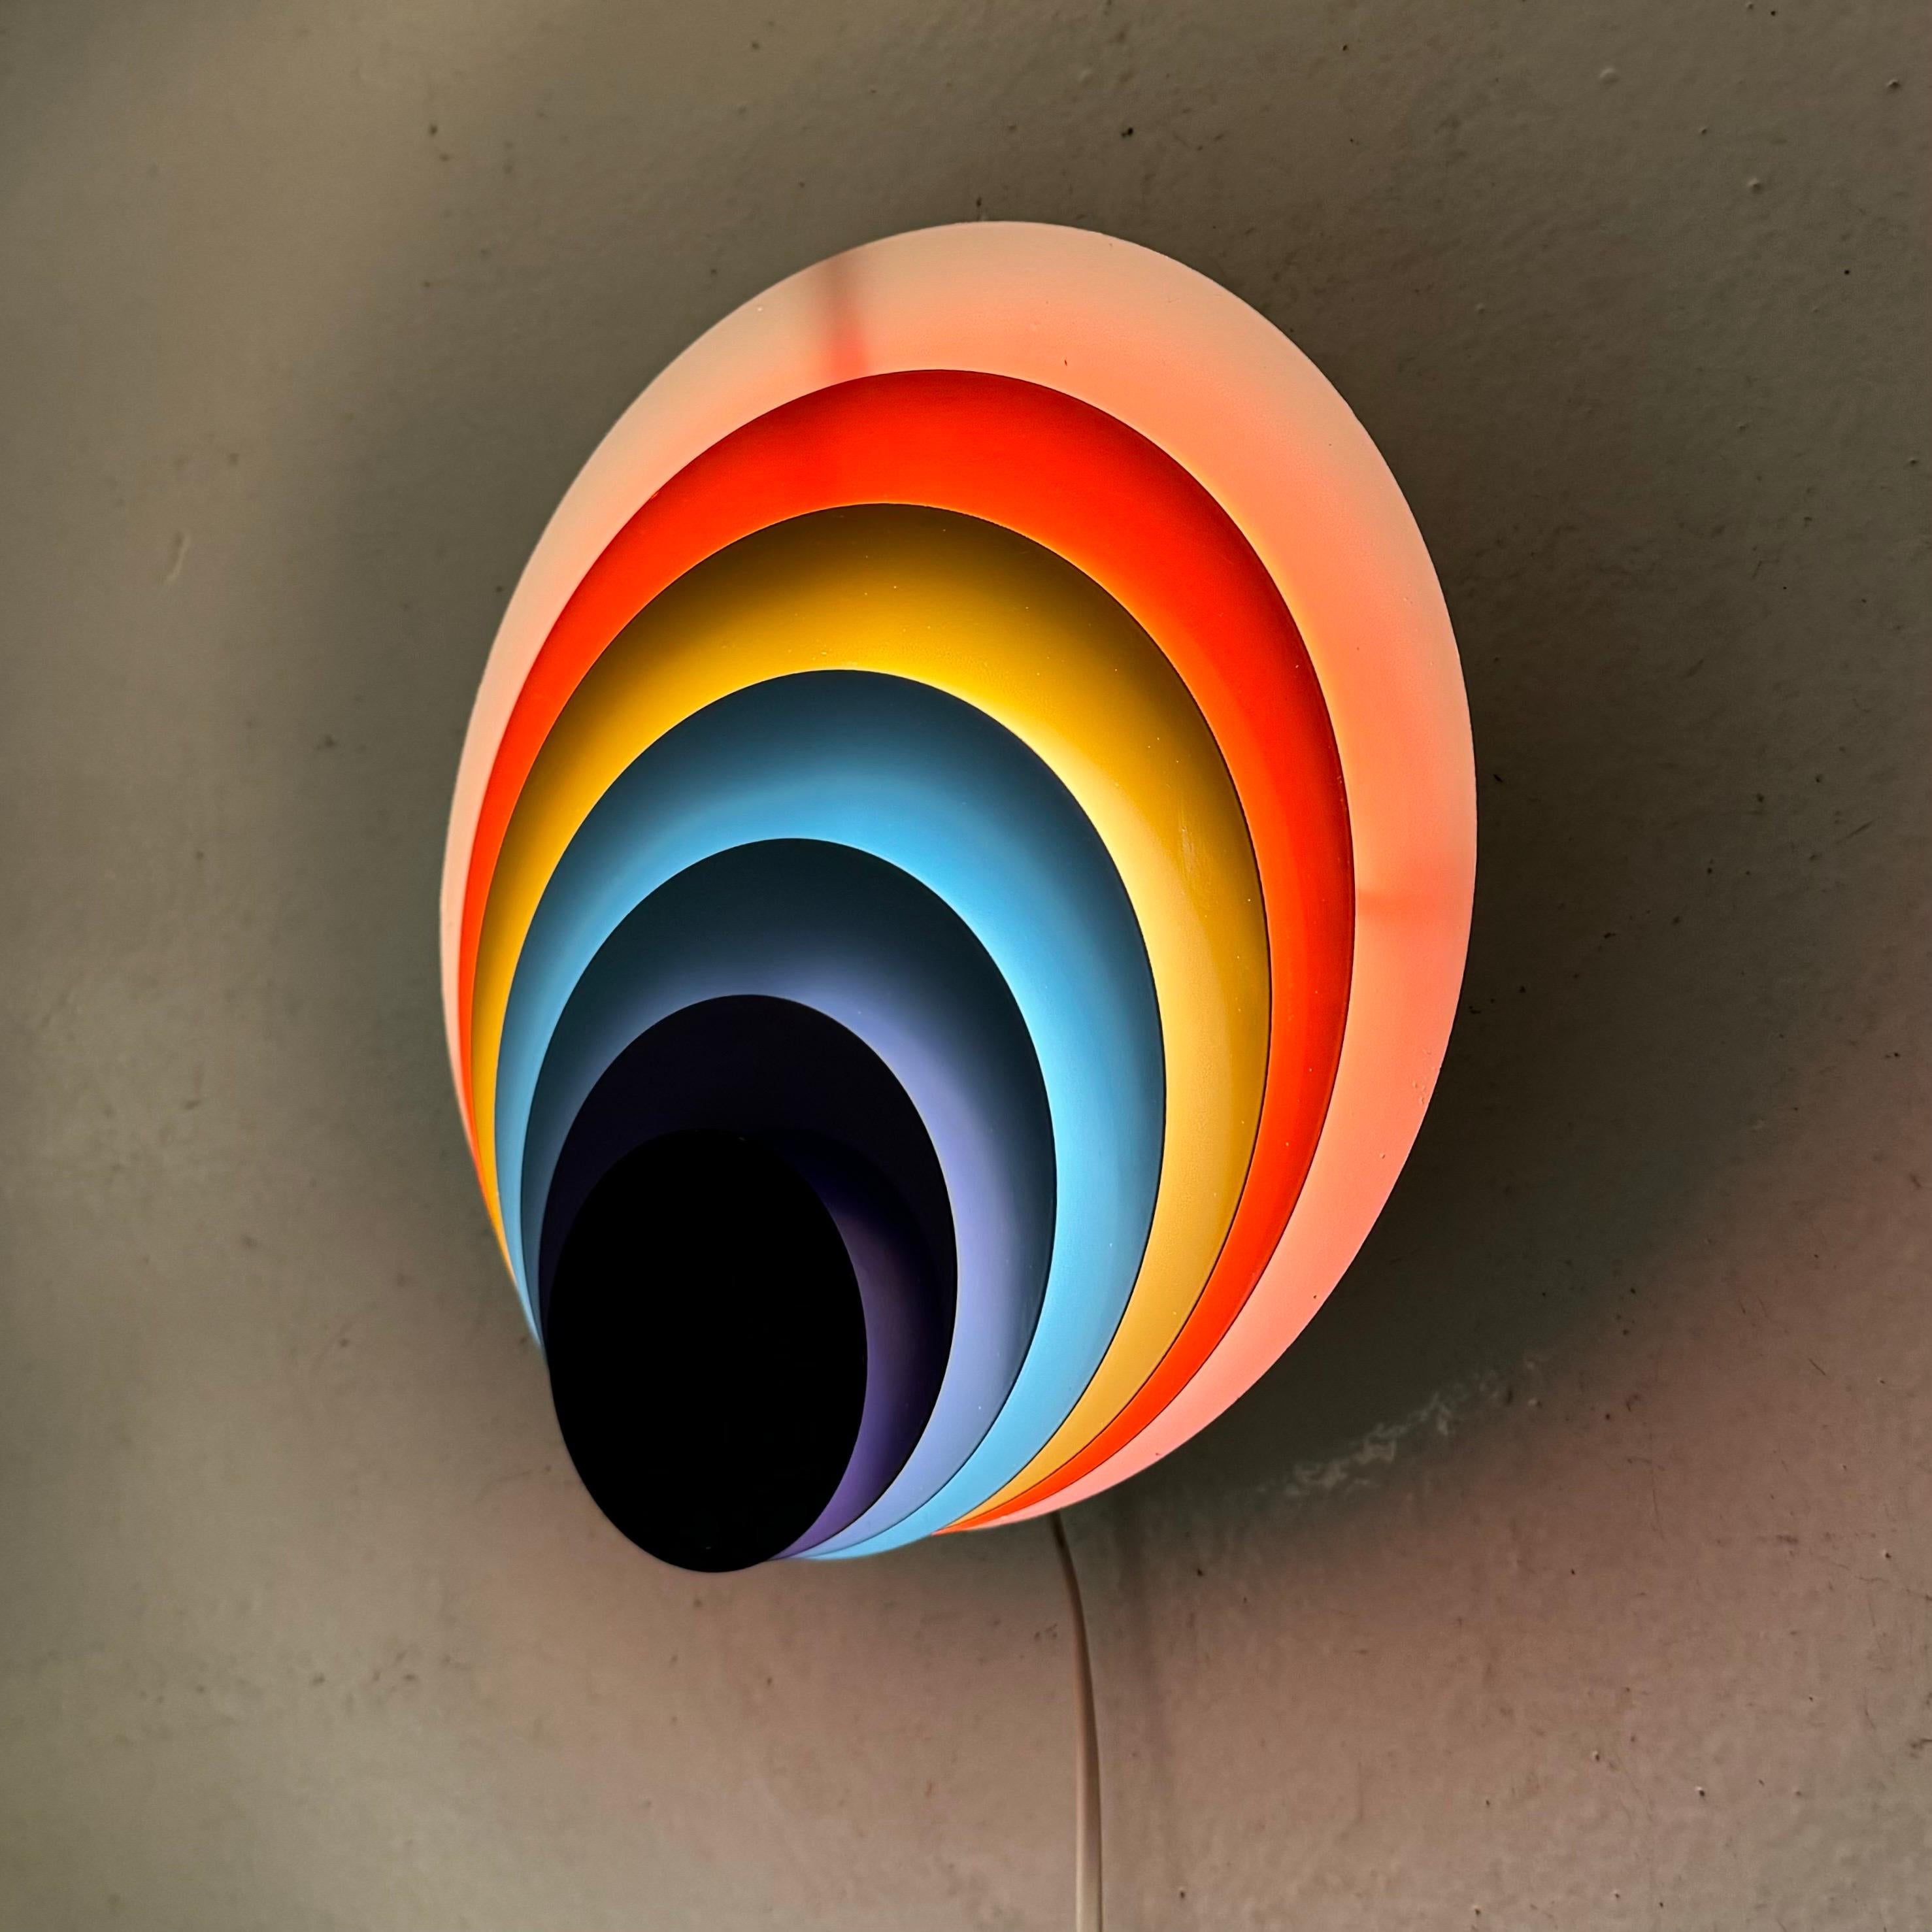 Metal Peacock wall sconce by Bent Karlby for LYFA, Denmark 1973.